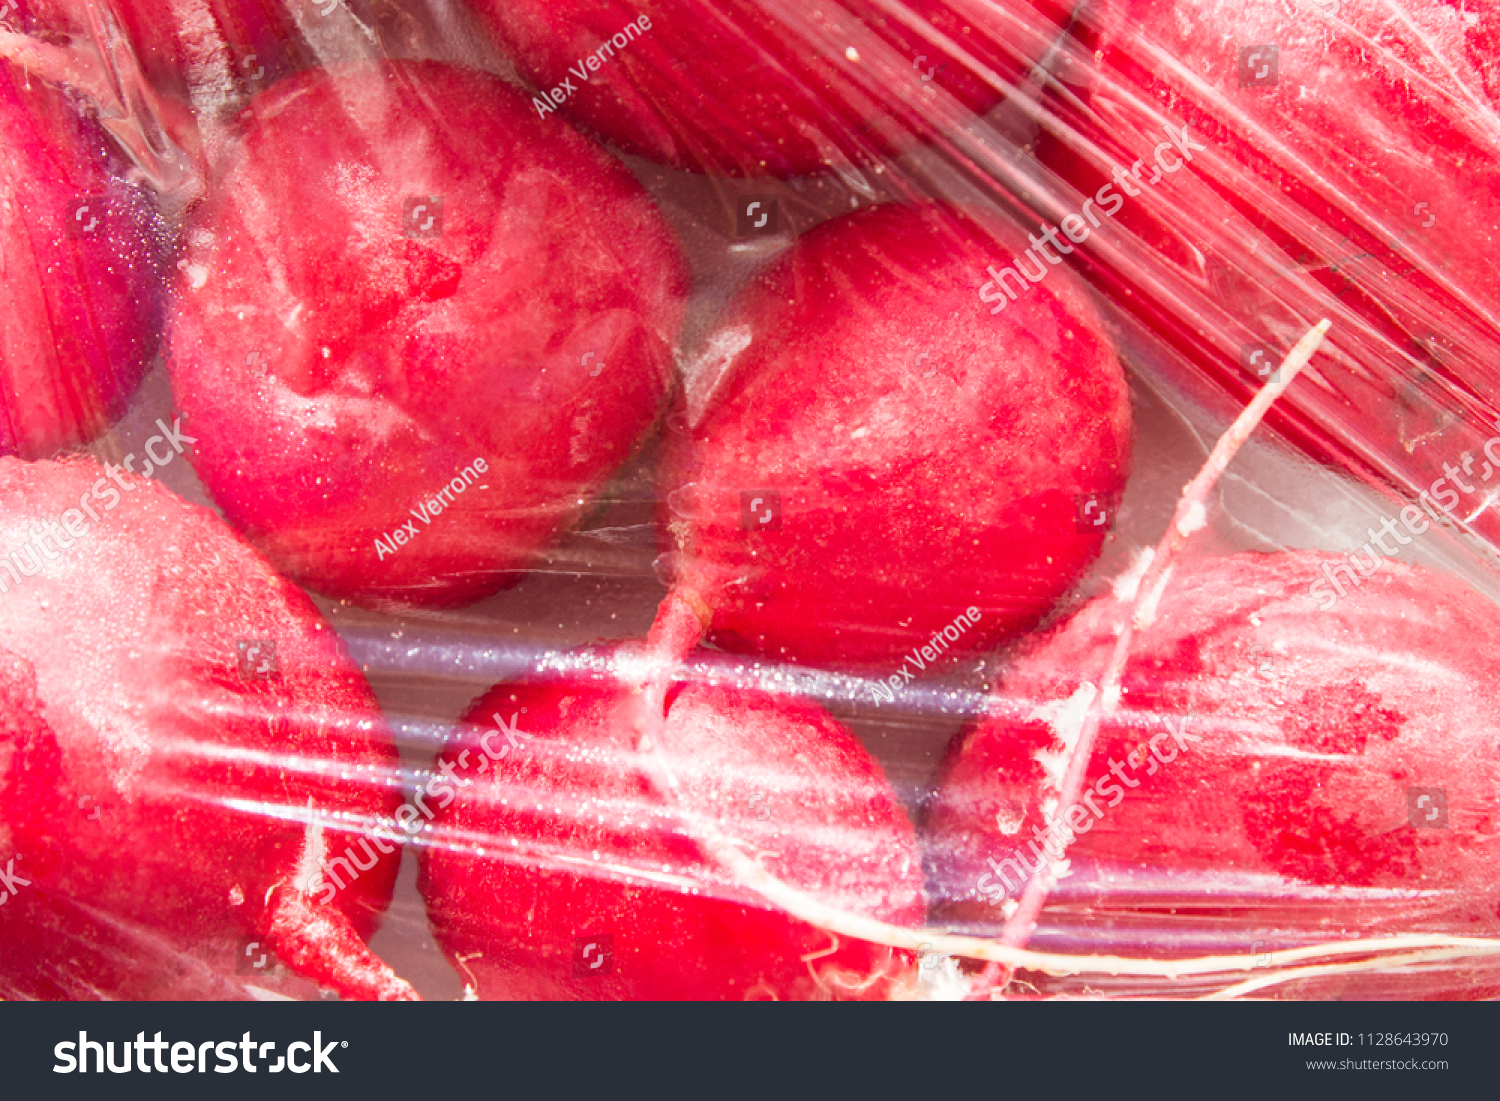 Download Red Radish Packed Plastic Bag Stock Photo Edit Now 1128643970 Yellowimages Mockups